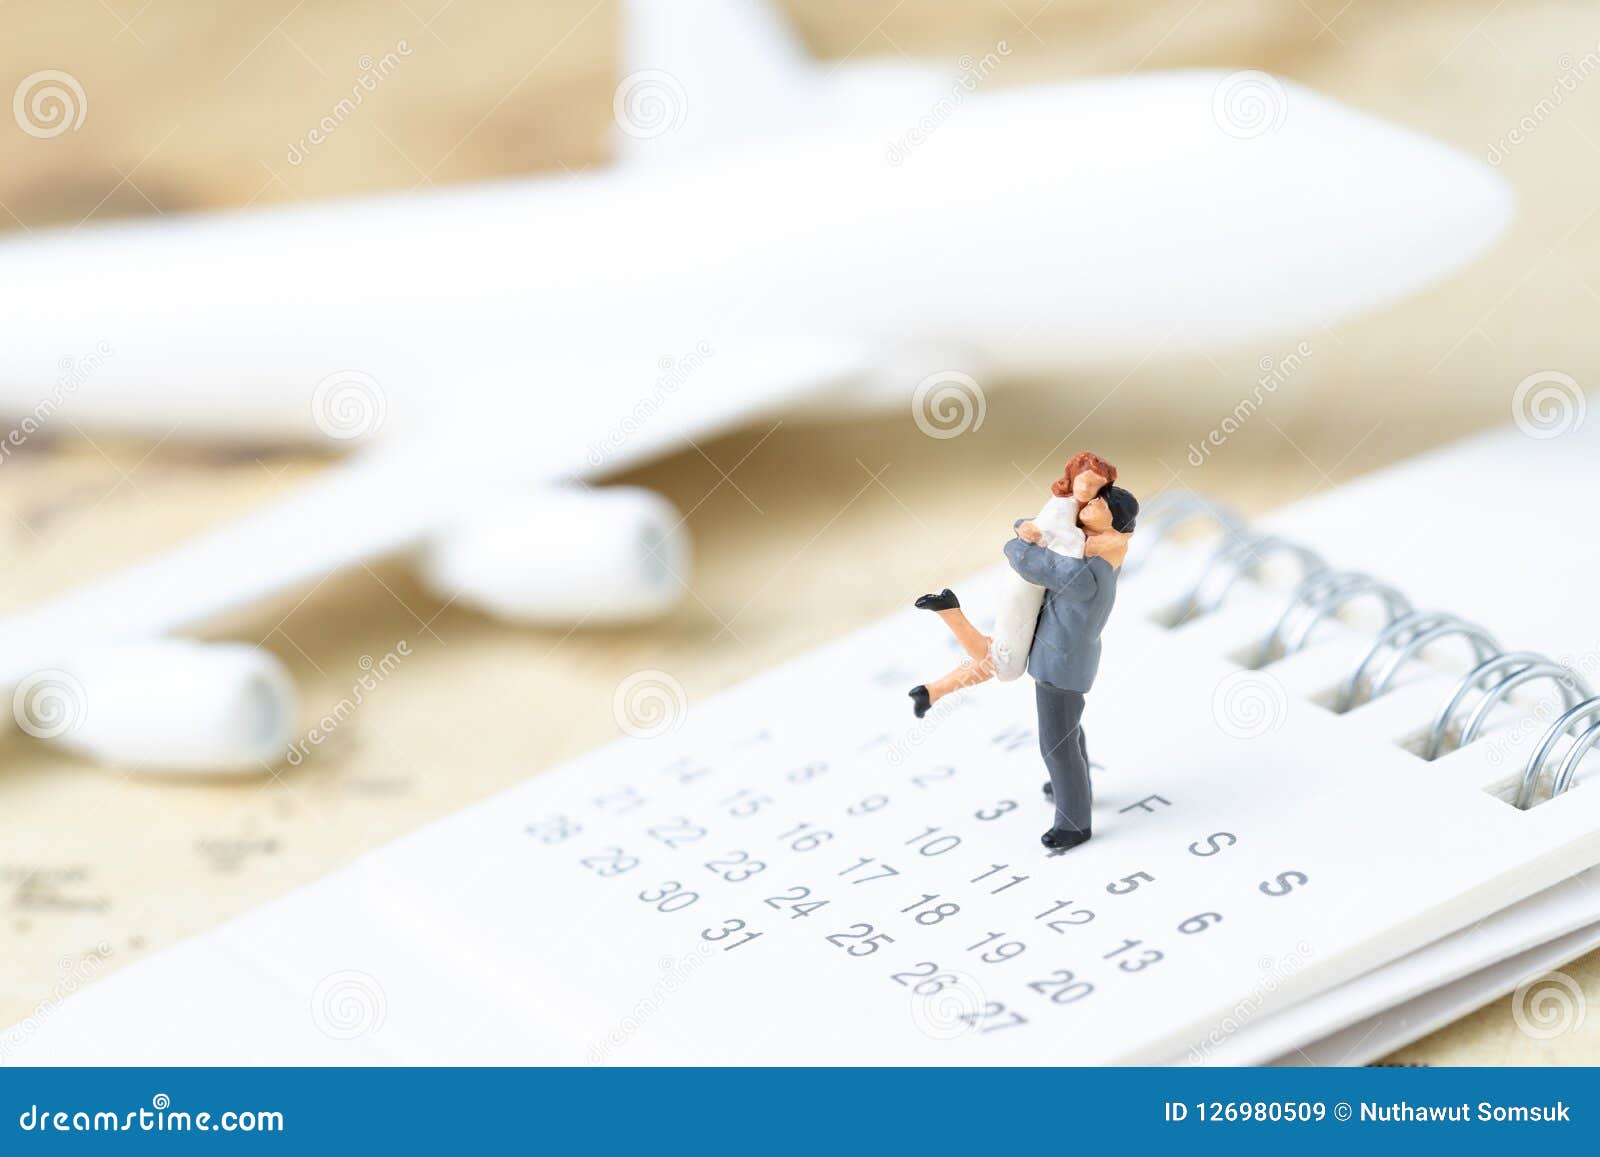 honeymoon trip, wedding proposal, family travel tourism and vacation concept, miniature young couple standing on calendar with to